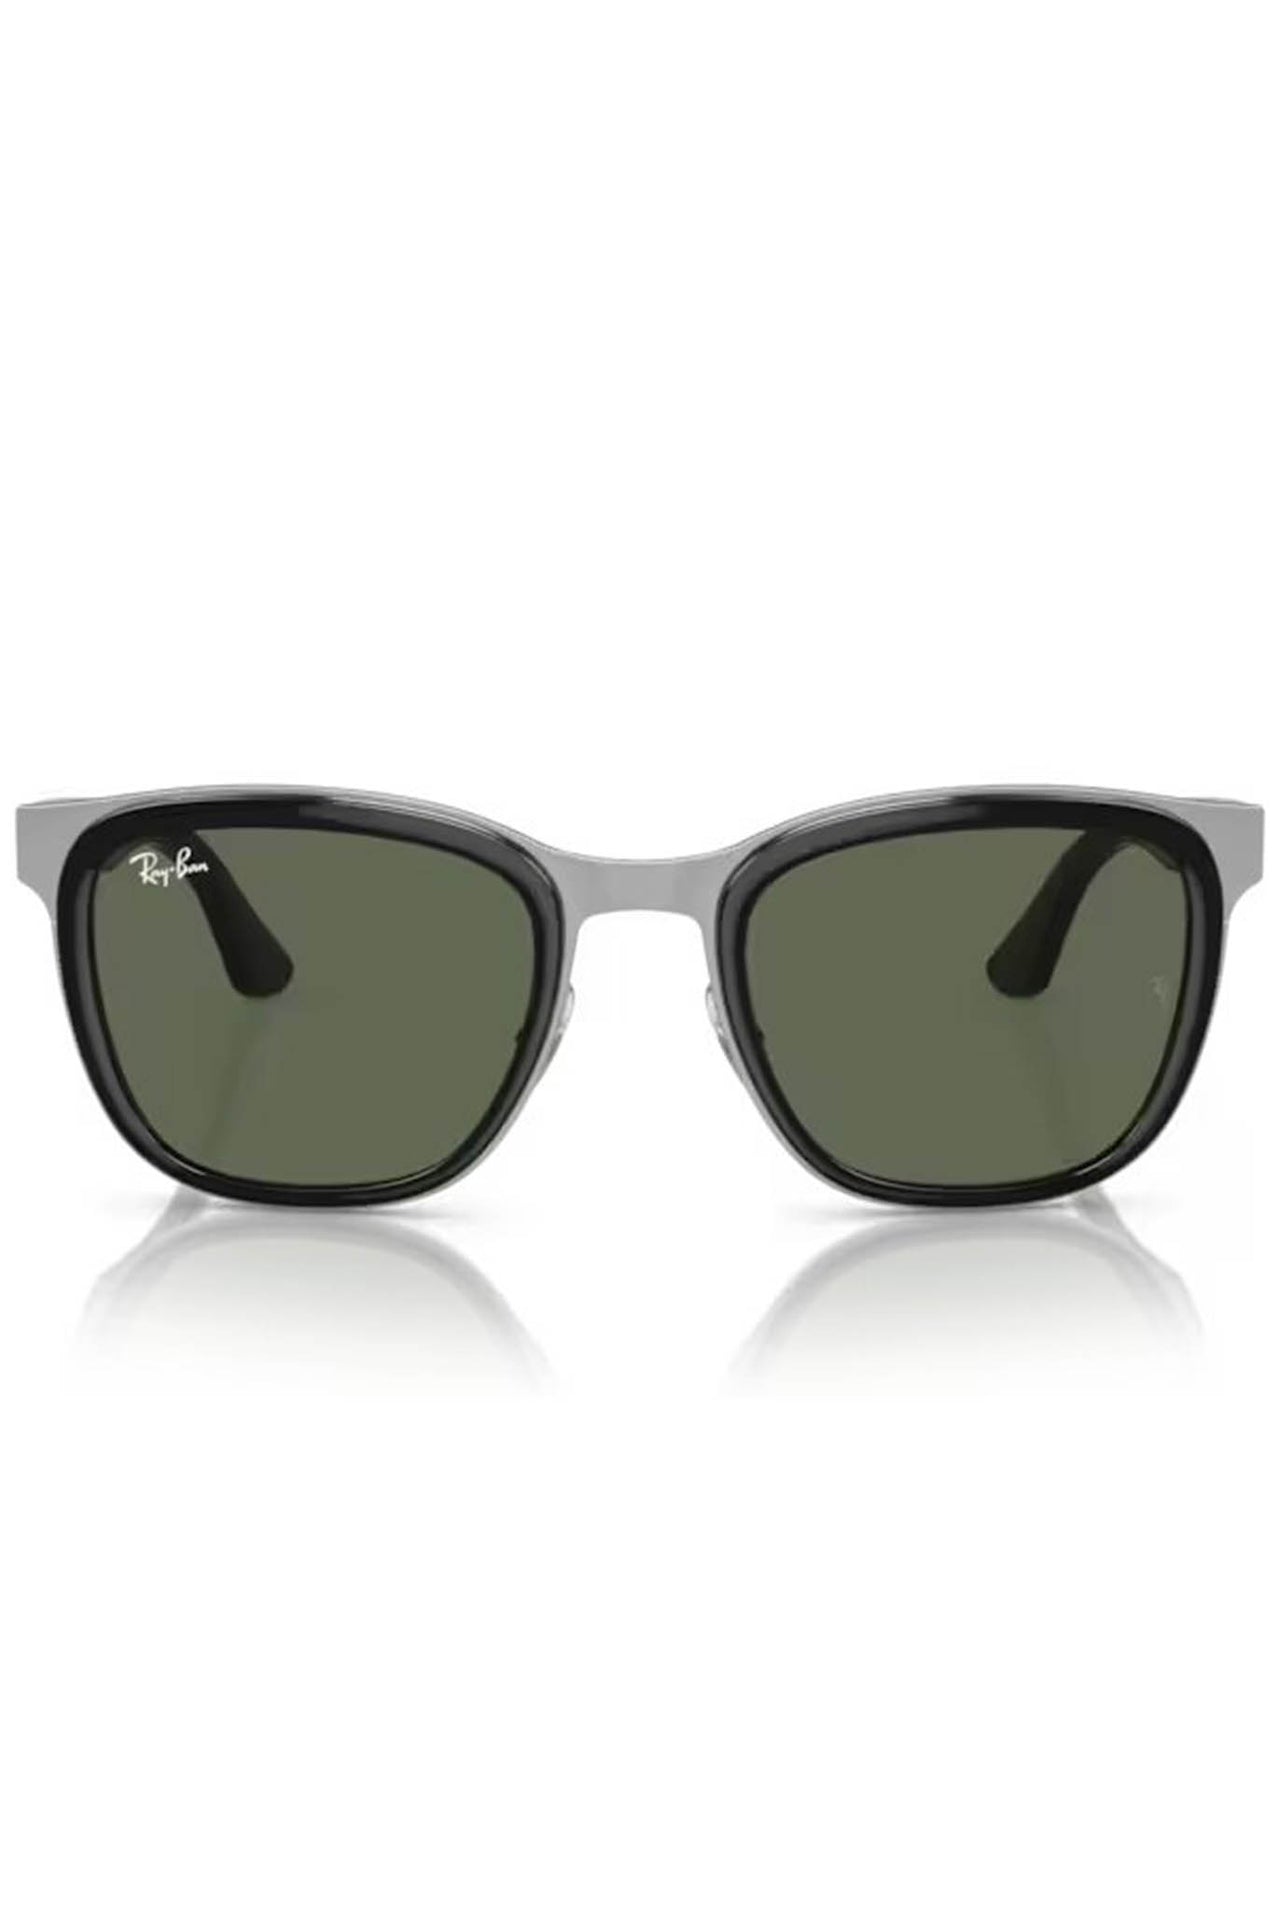 Gafas Ray-Ban Clyde RB3709 003/71 53